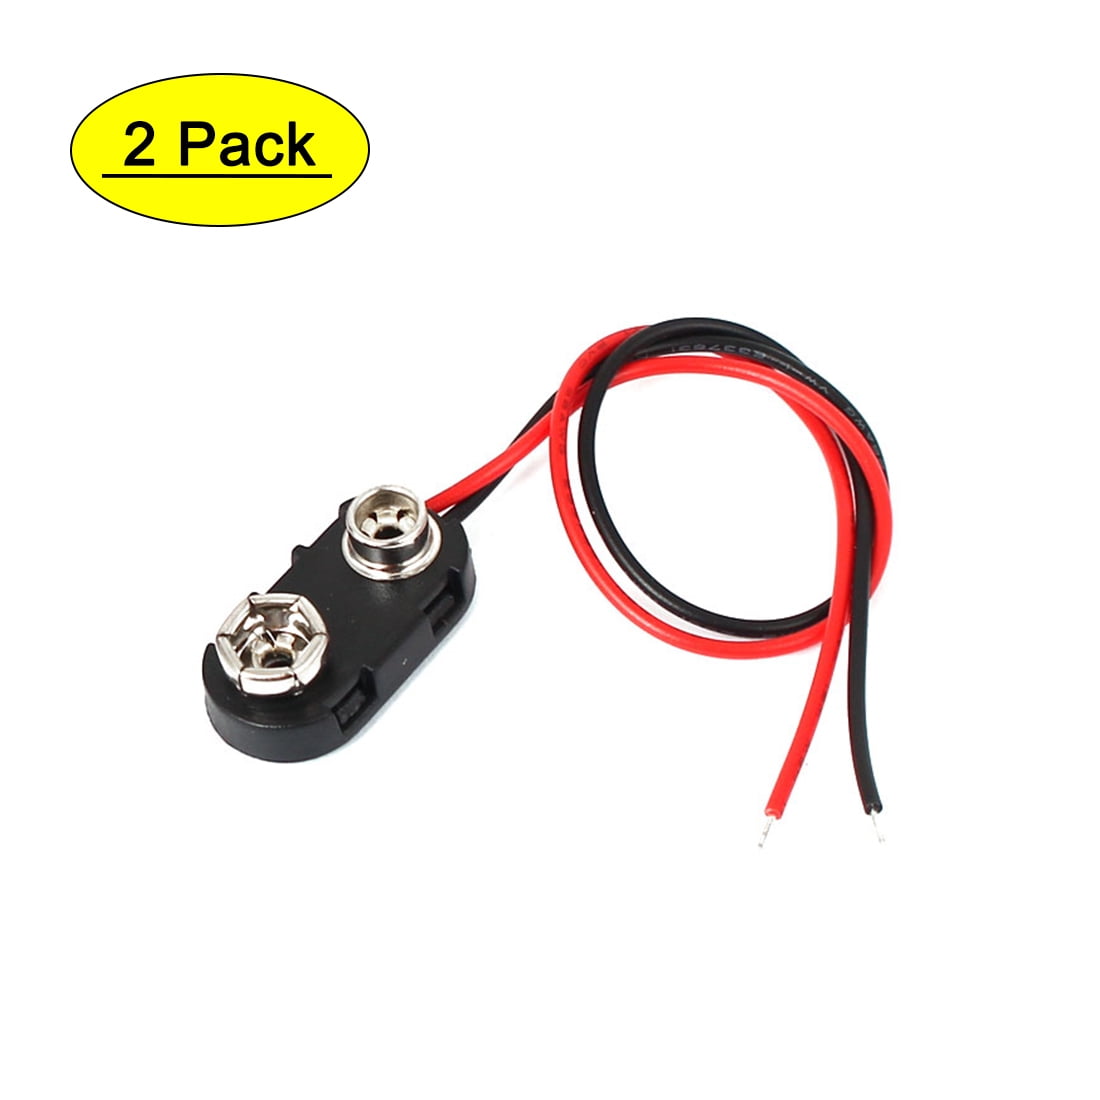 10x 9V 15cm T Type Battery Connector Clip Plug Wire Cord Leads Supplies Part Kit 